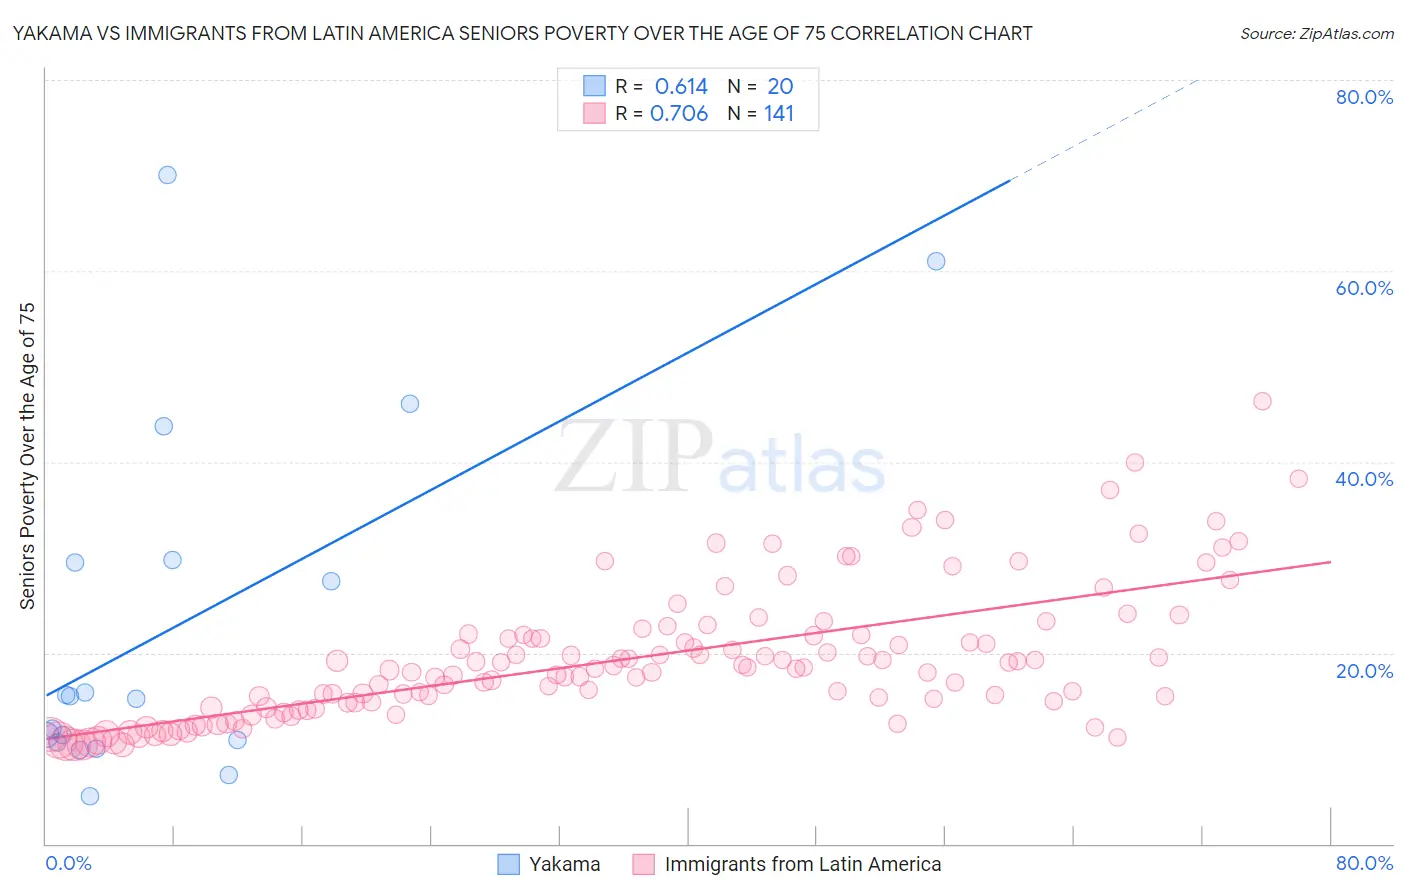 Yakama vs Immigrants from Latin America Seniors Poverty Over the Age of 75